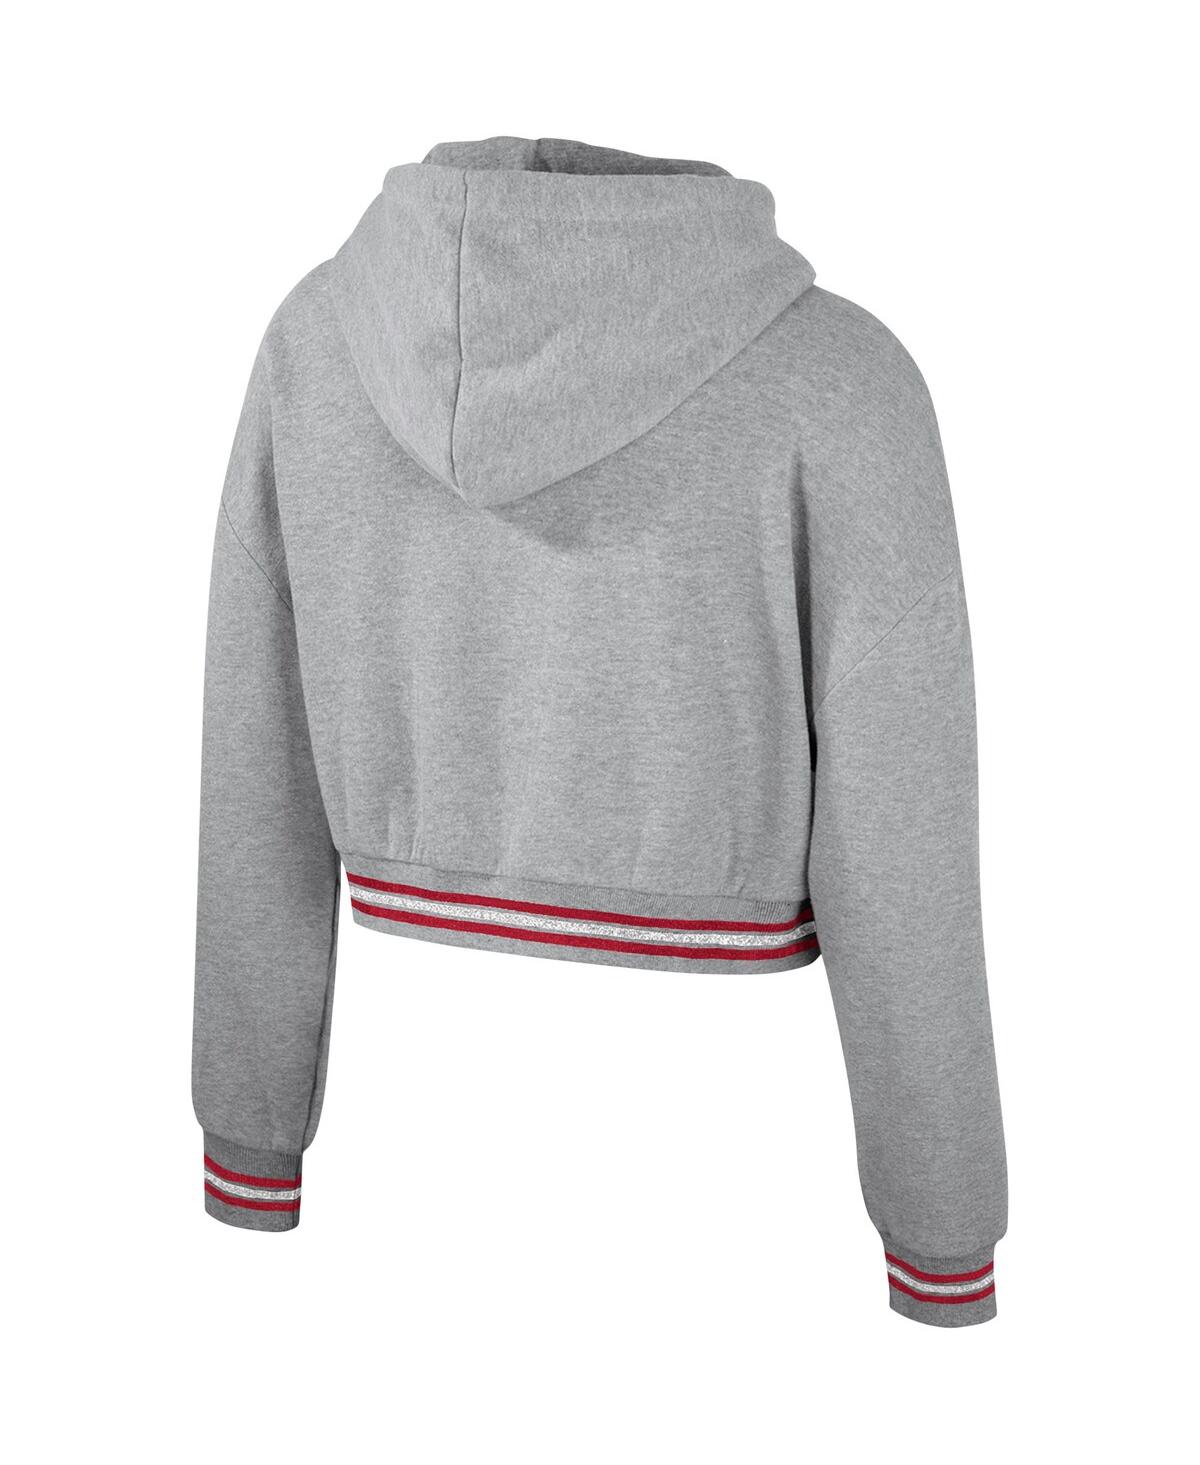 Shop The Wild Collective Women's  Heather Gray Distressed Oklahoma Sooners Cropped Shimmer Pullover Hoodie